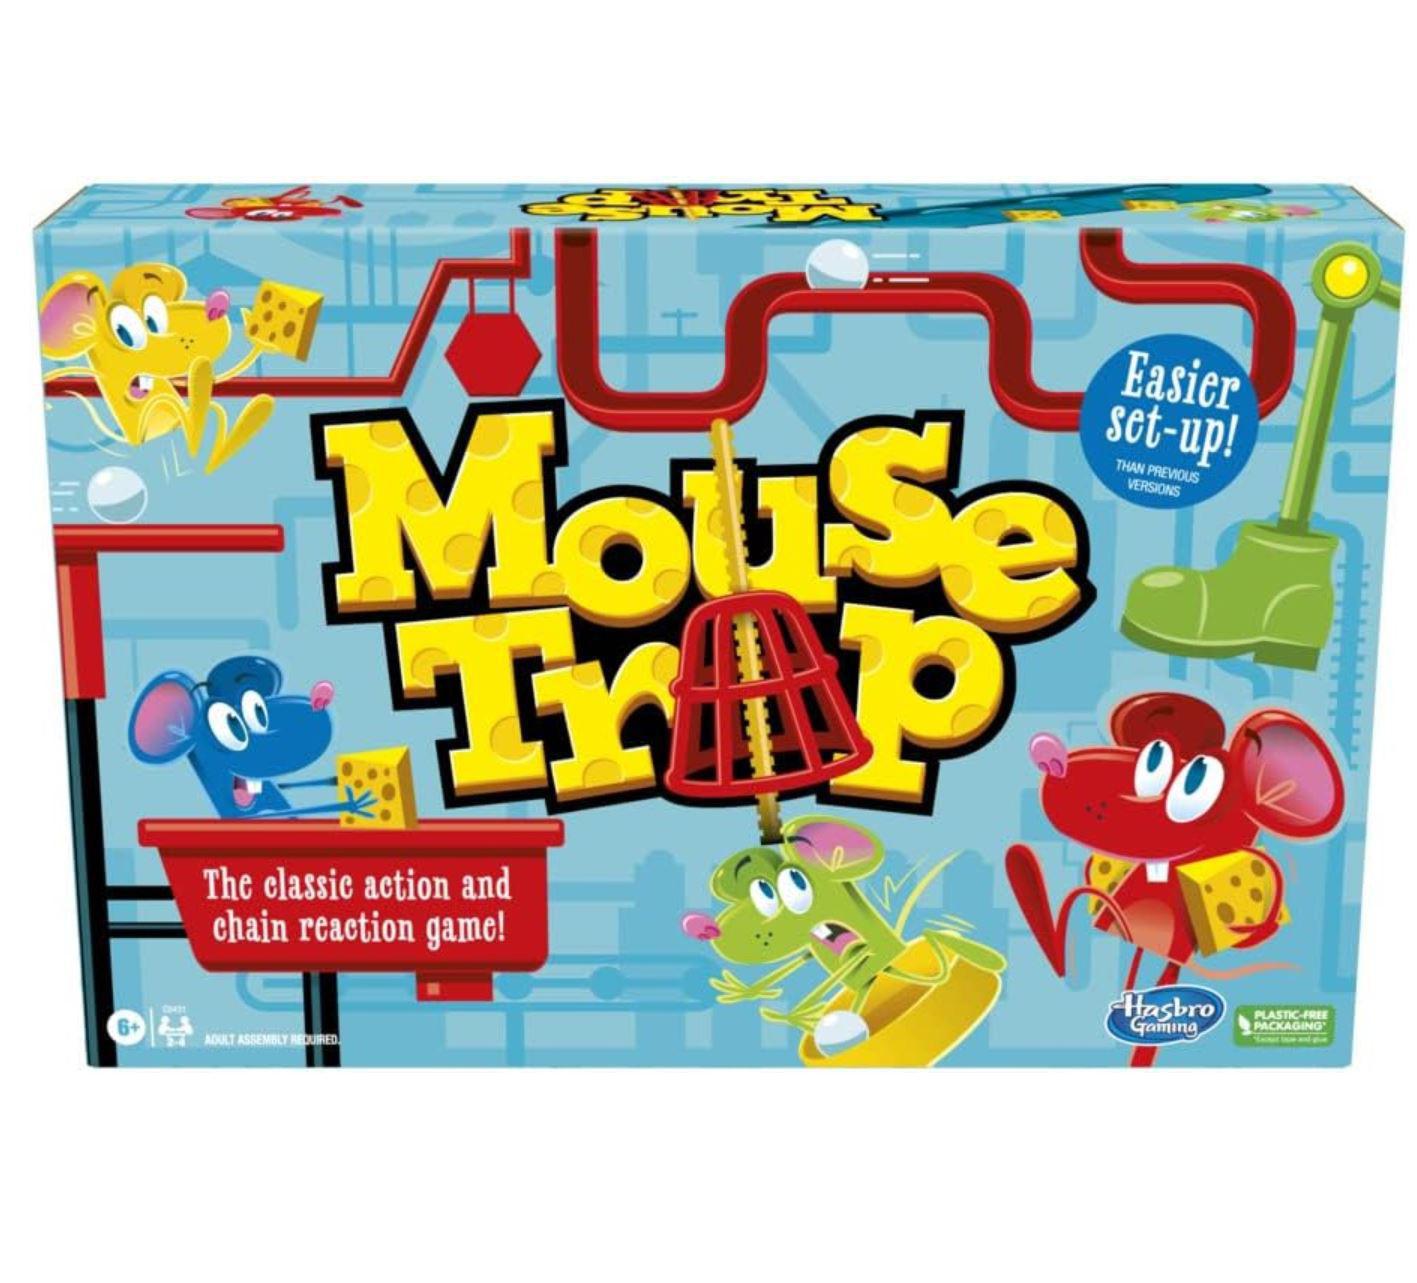 Mouse Trap, Board Game